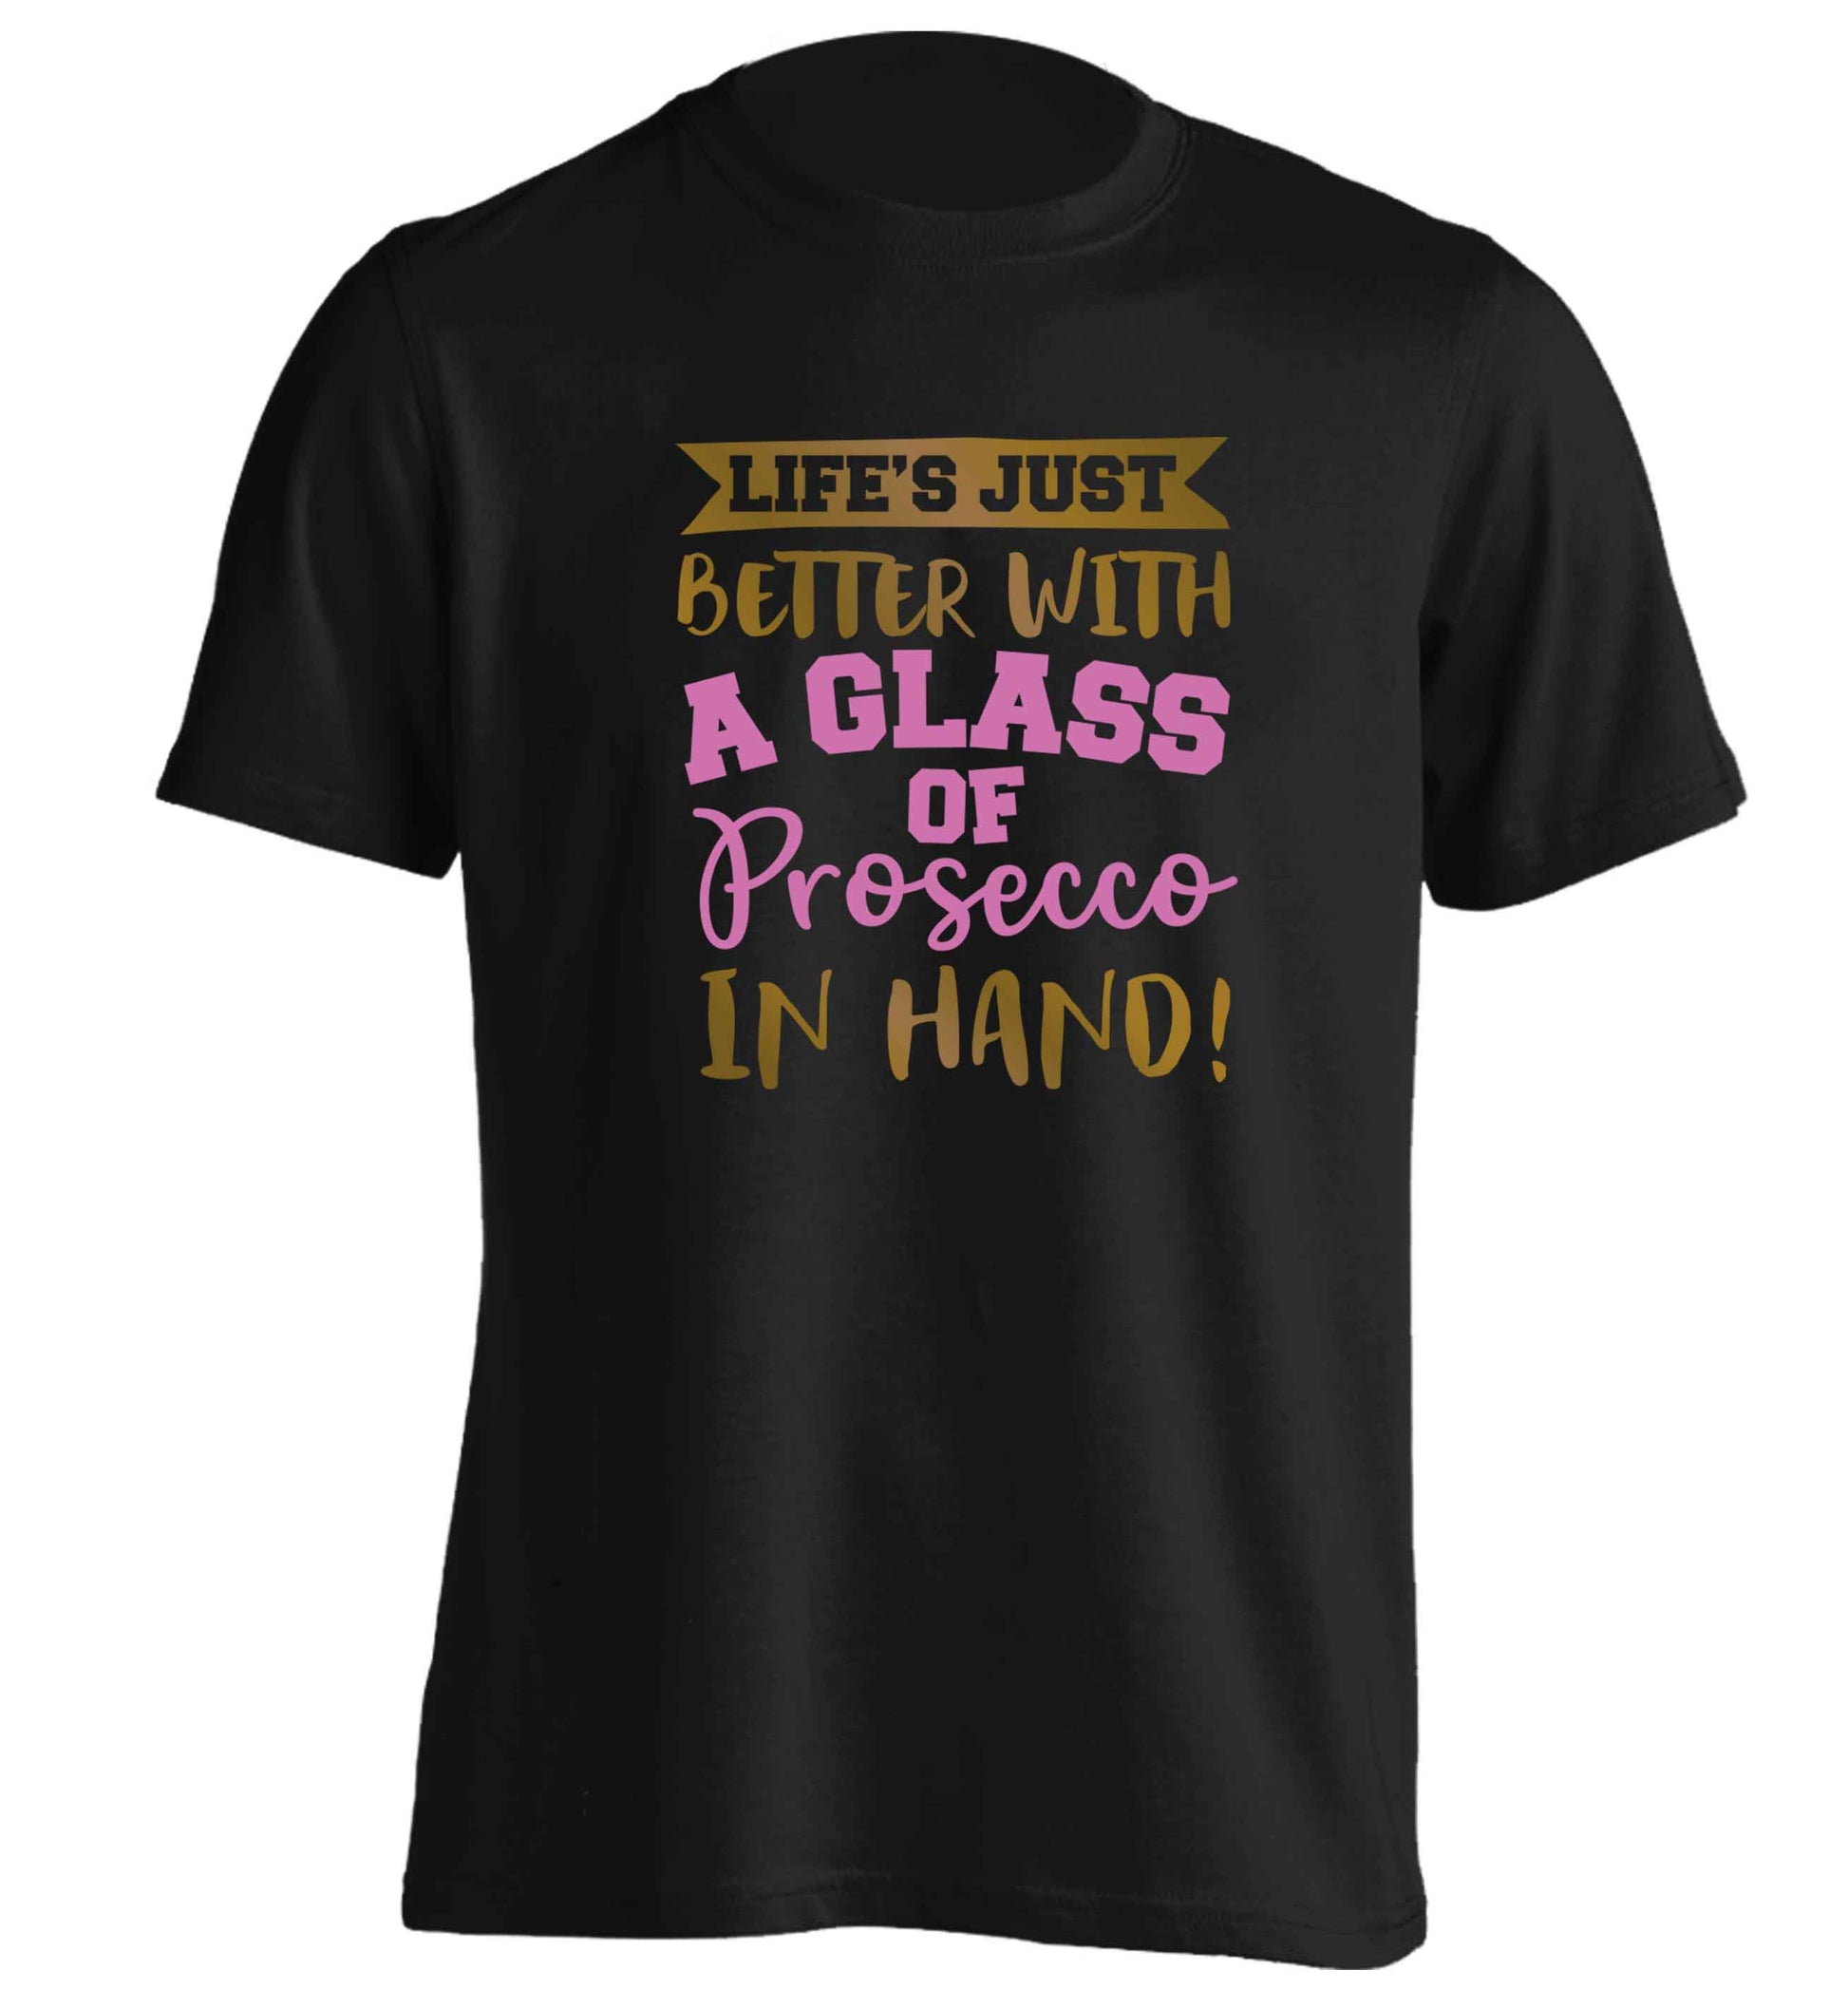 Life's just better with a glass of prosecco in hand adults unisex black Tshirt 2XL